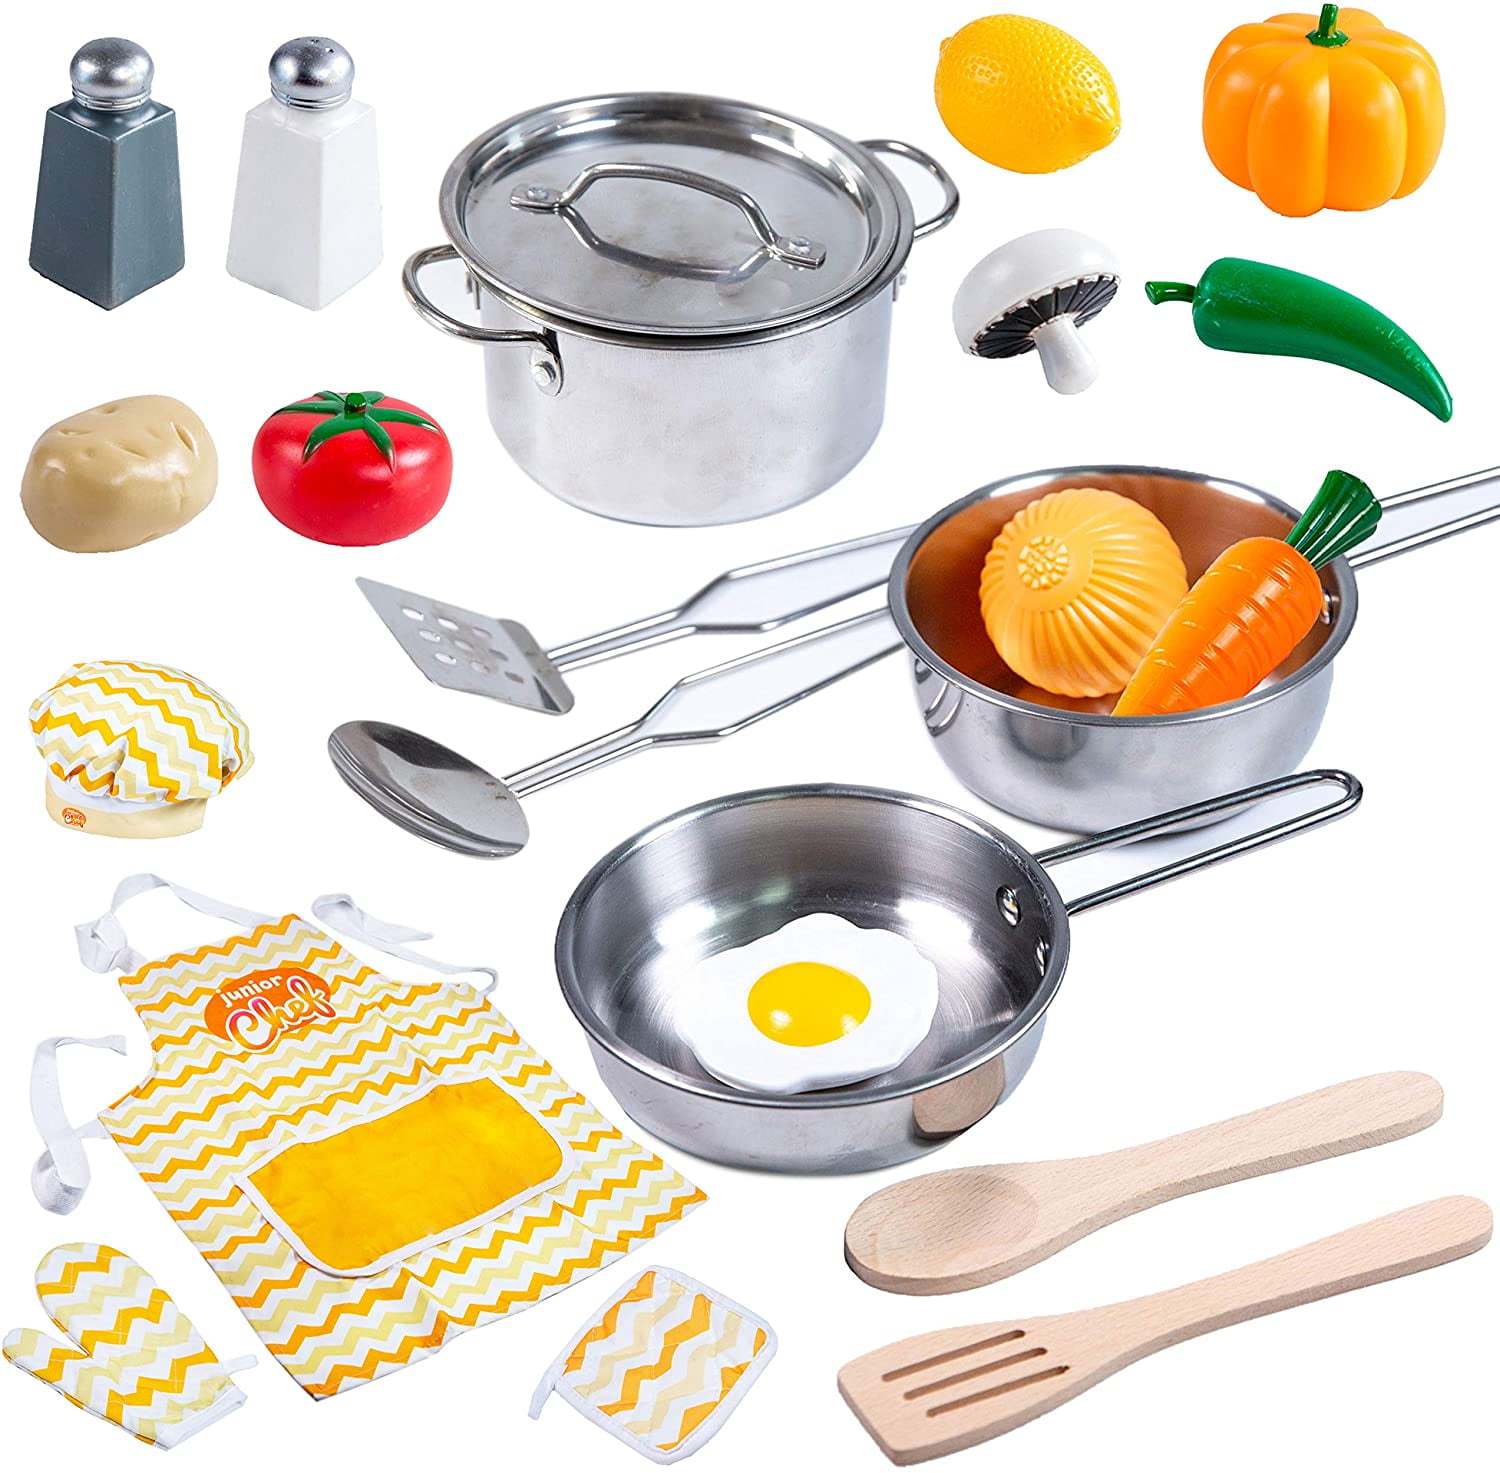 Kitchen Play Kids Set Toy Cooking Food Pretend Role Toys Gift Cookware Accessory 